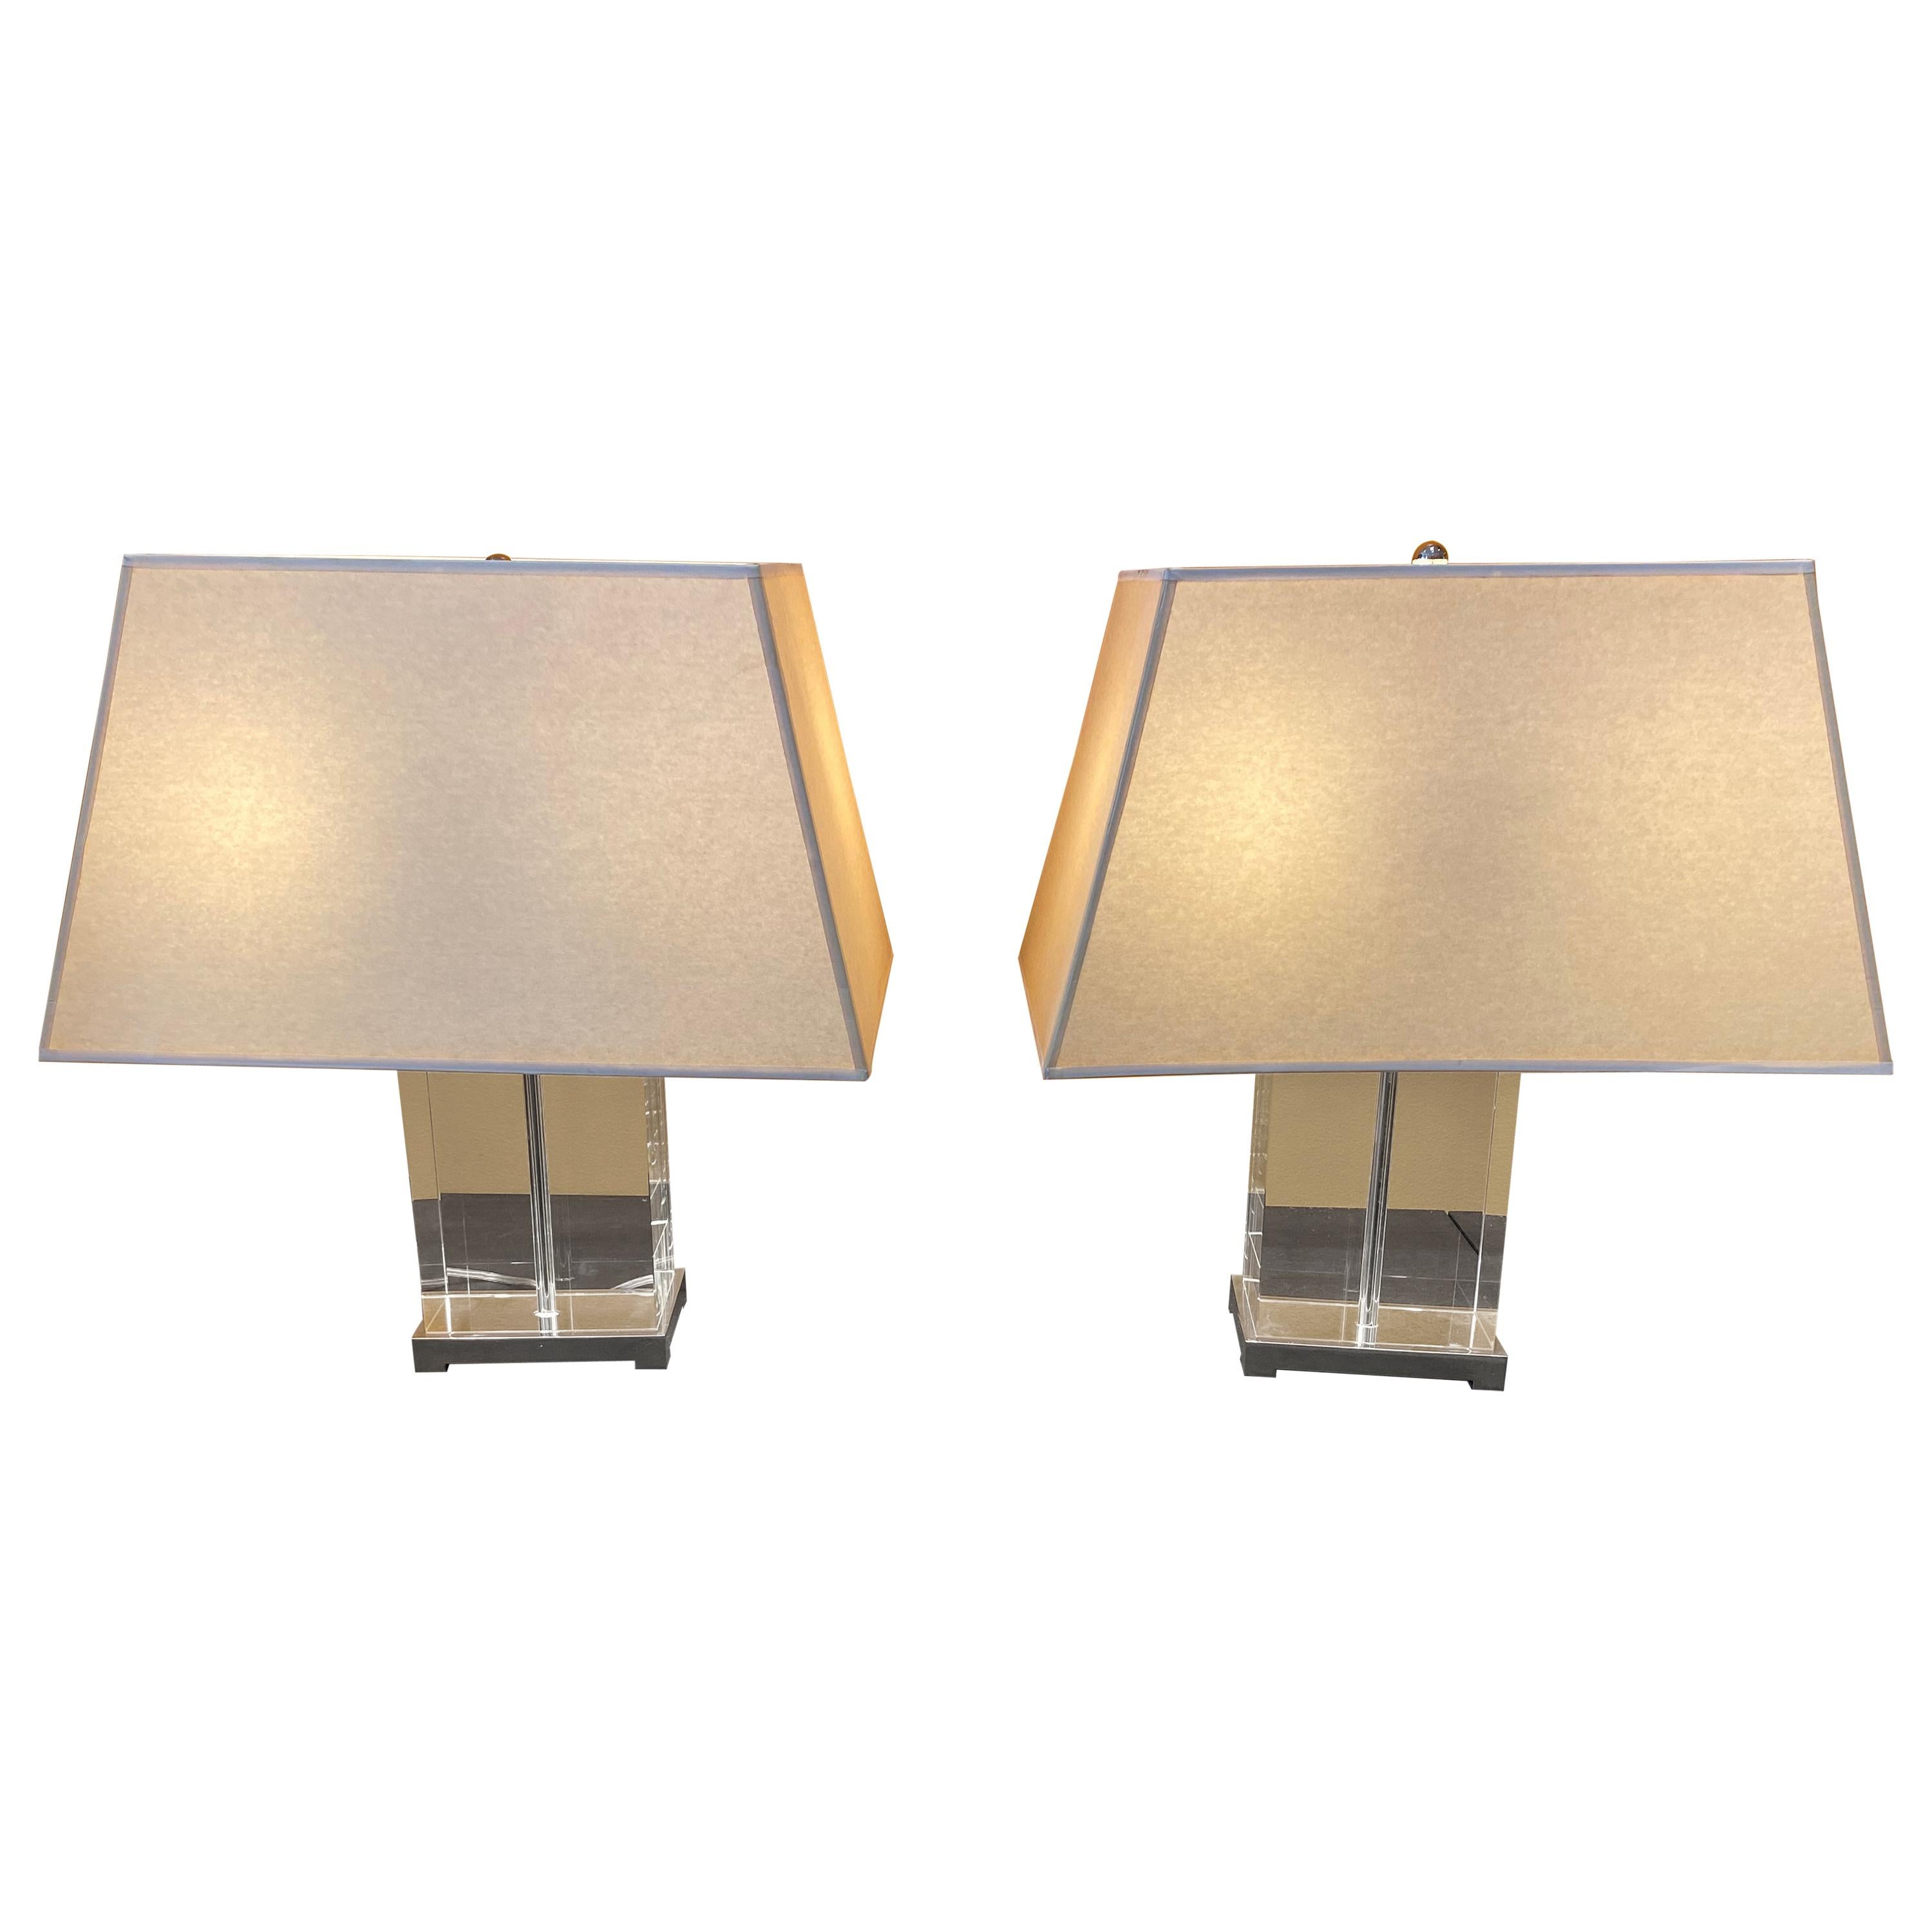 Pair of Modern Glass Cube Lamps with Plated Silver Accents